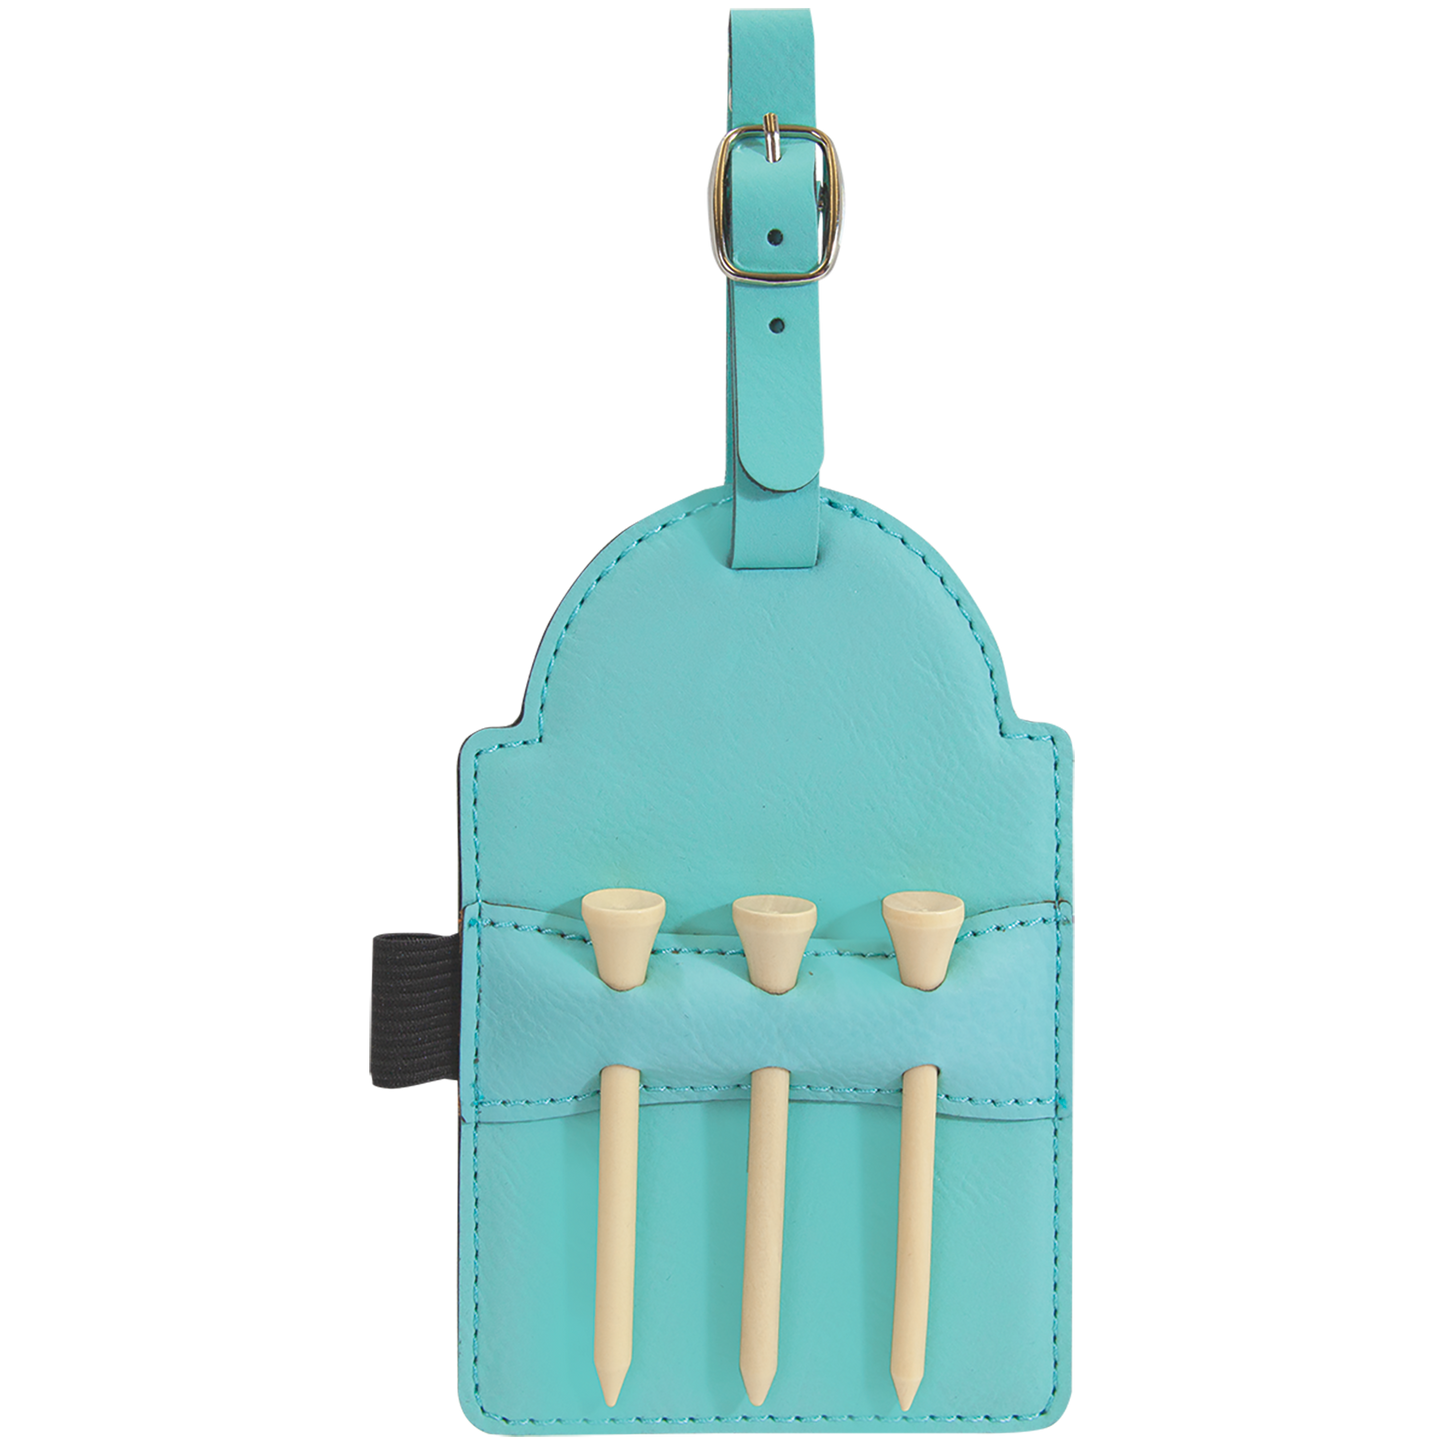 5" x 3 1/4" Teal Leatherette Golf Bag Tag with 3 Wooden Tees